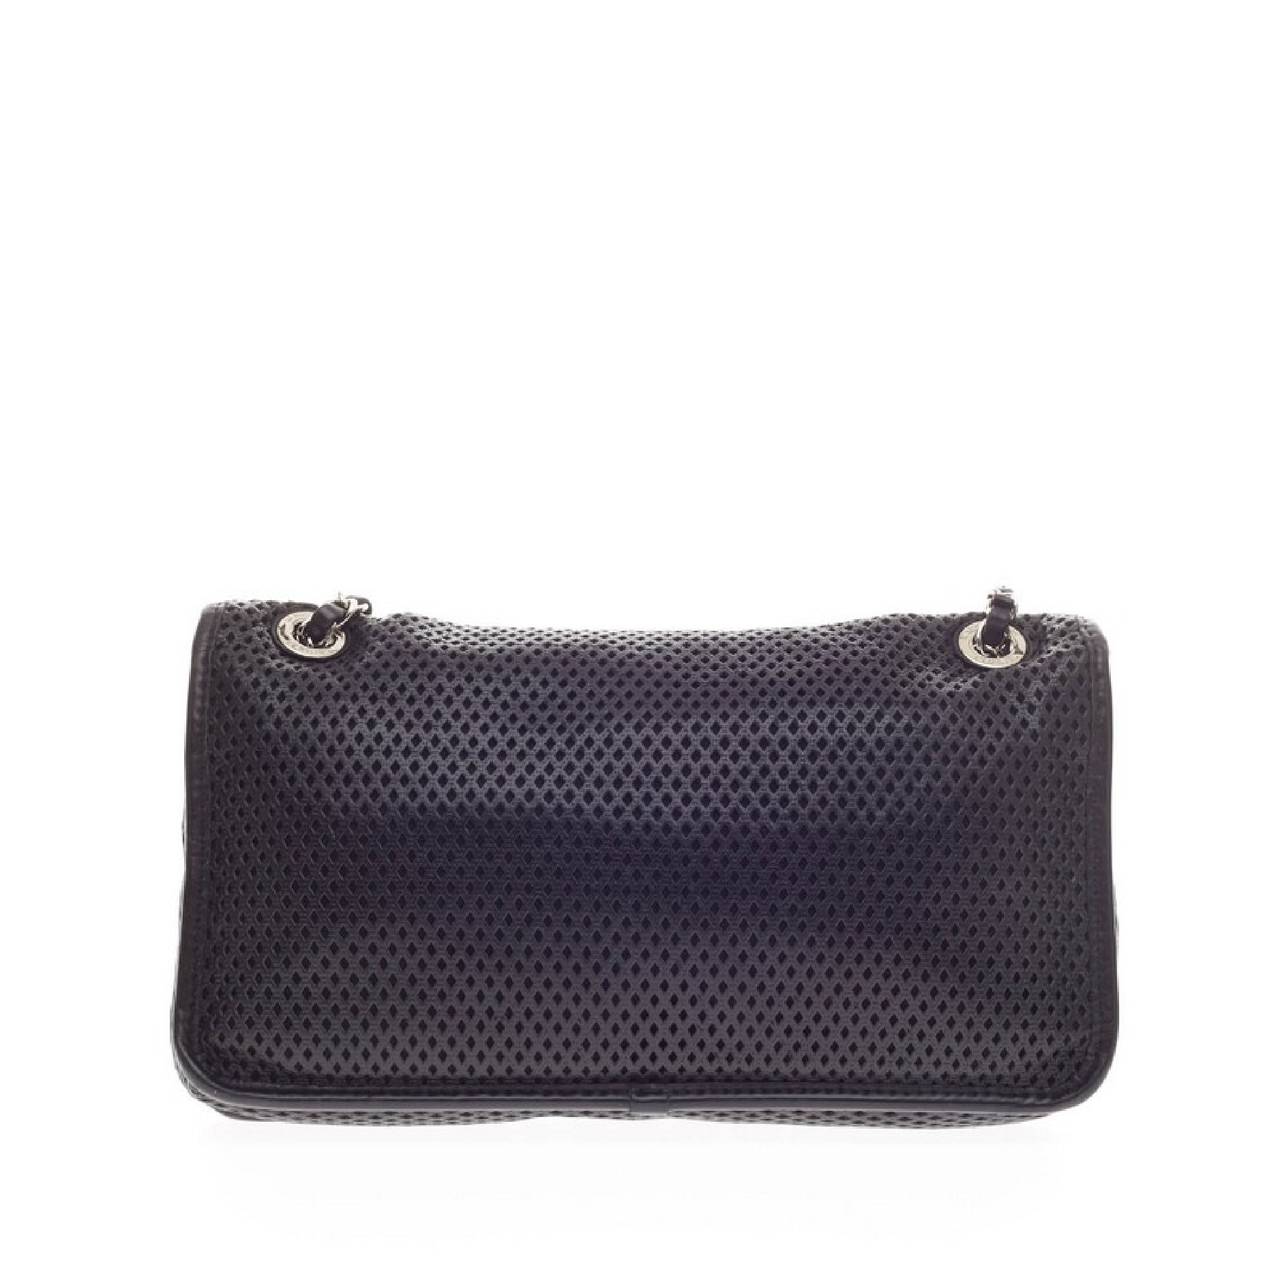 Women's Chanel Up In The Air Flap Perforated Leather